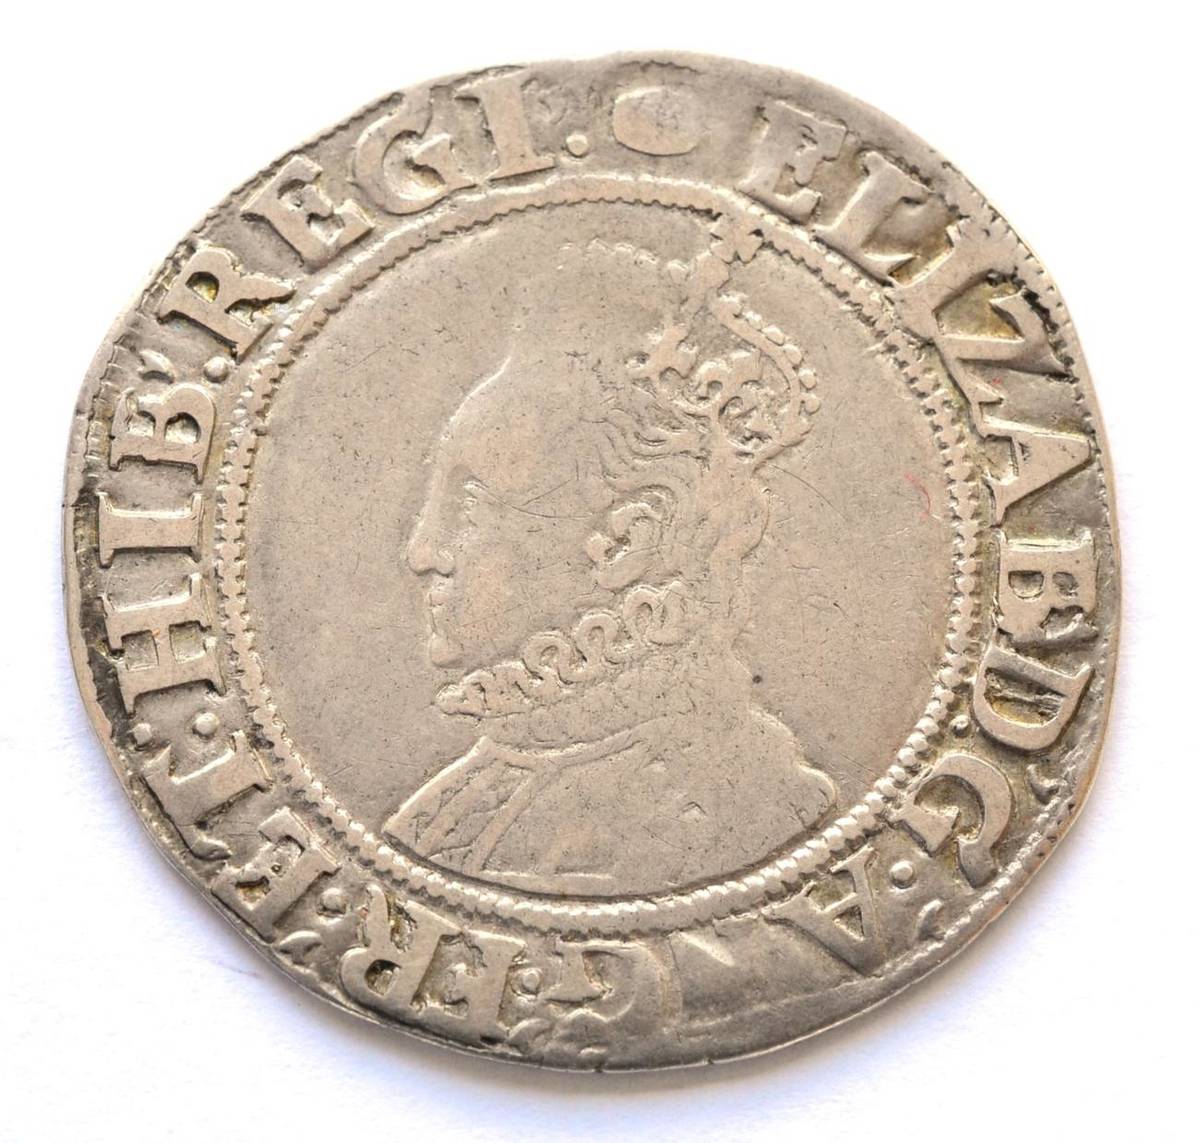 Lot 12 - Elizabeth I Shilling, sixth issue without rose or date, MM tun; sixth bust (ear shows); full, round